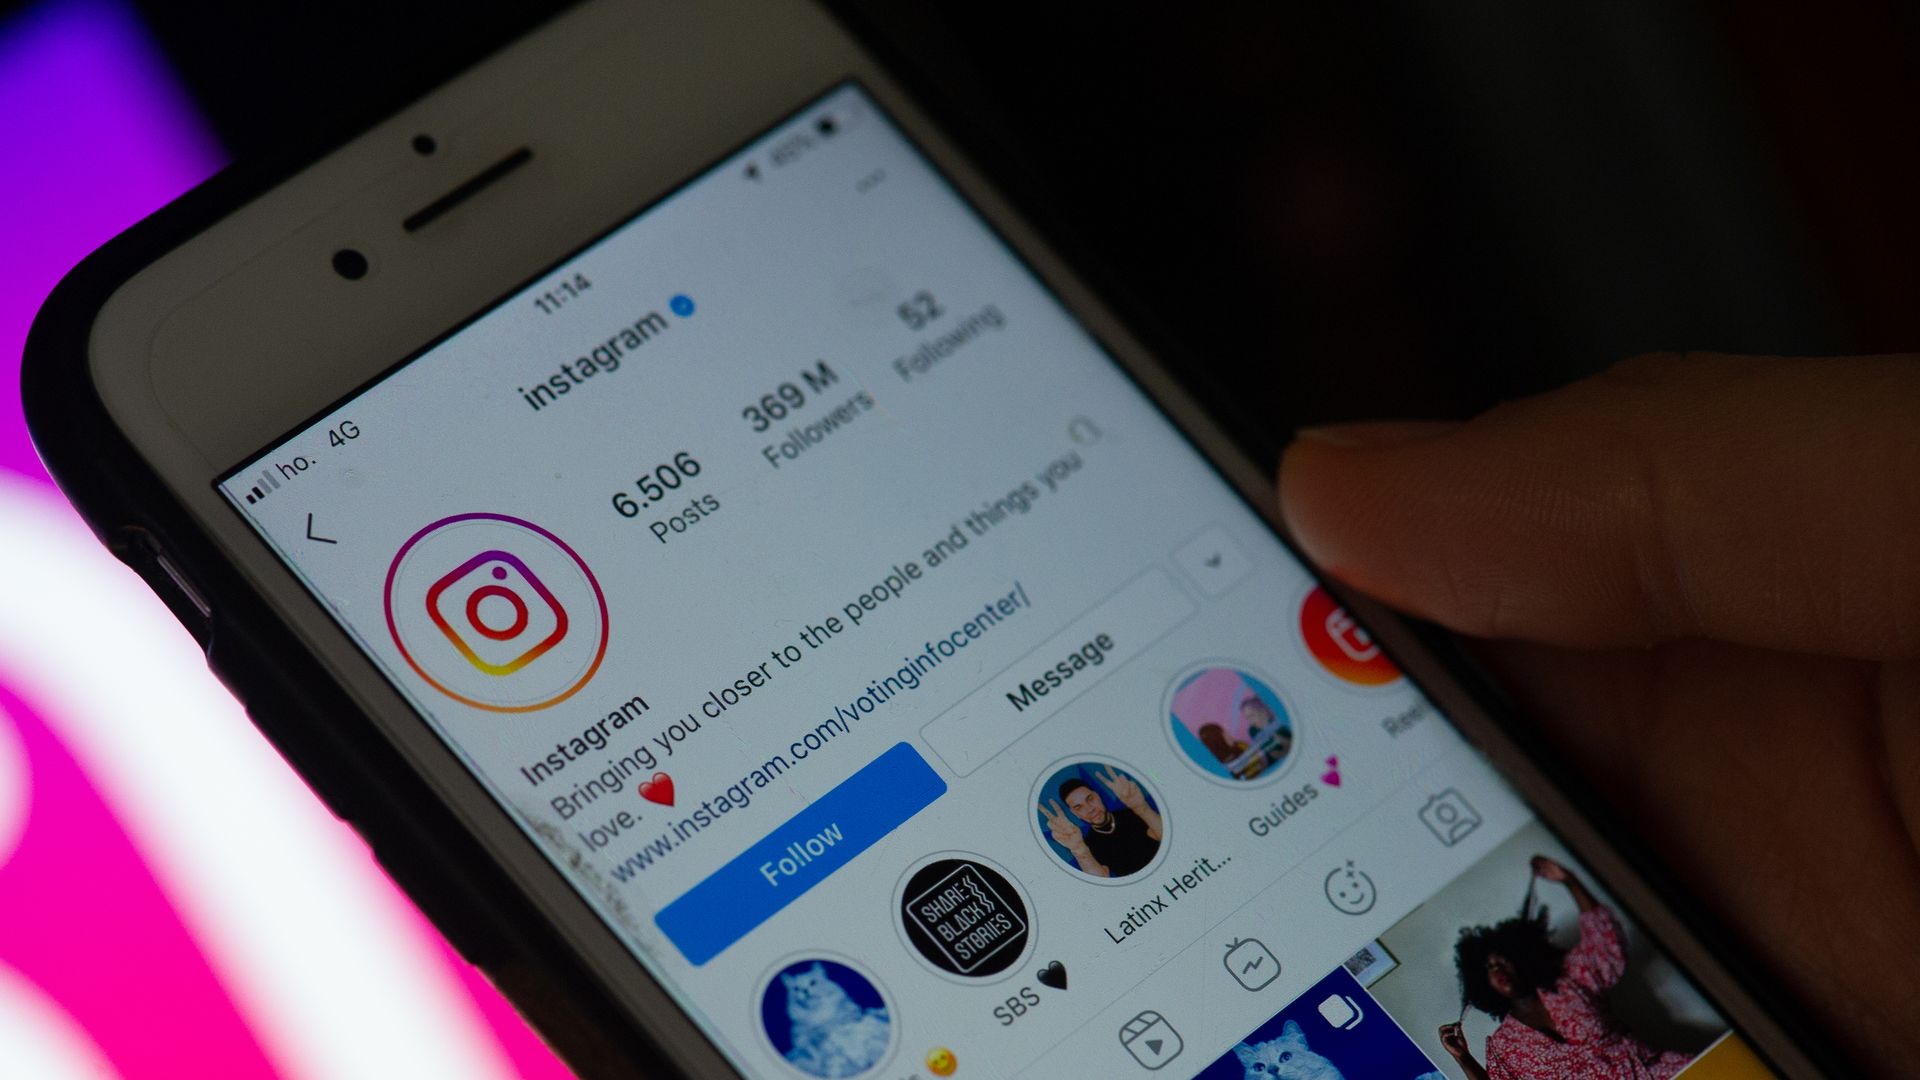 Picture of an iPhone displaying Instagram's profile page